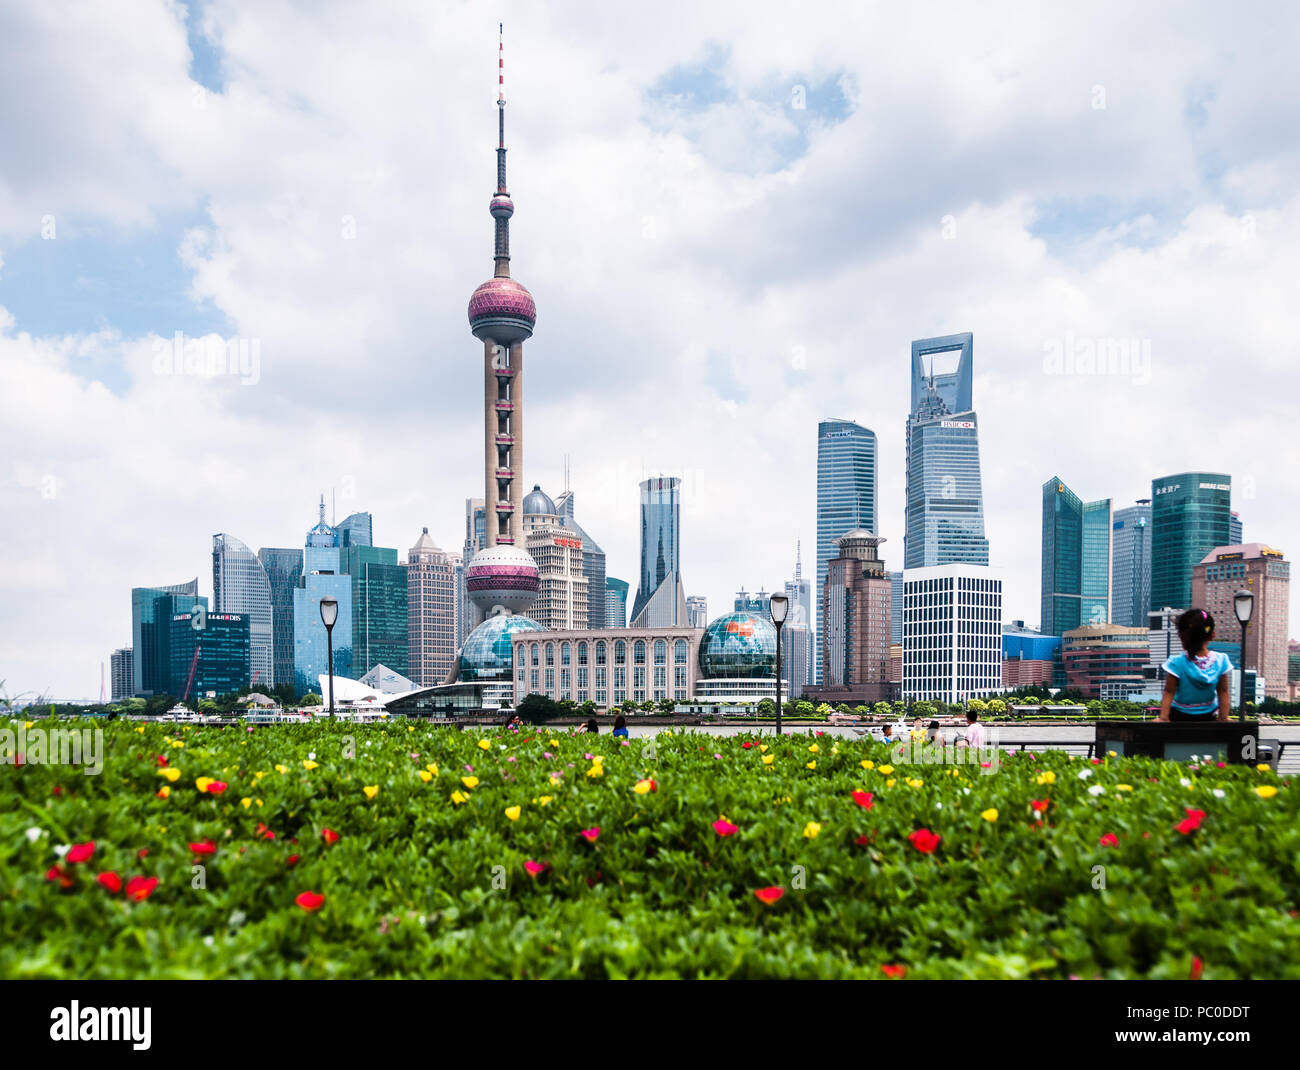 Landscape view of the Bund (Waitan), Shanghai, with yellow and red flowers in the foreground and the Oriental Pearl TV Tower in the background Stock Photo